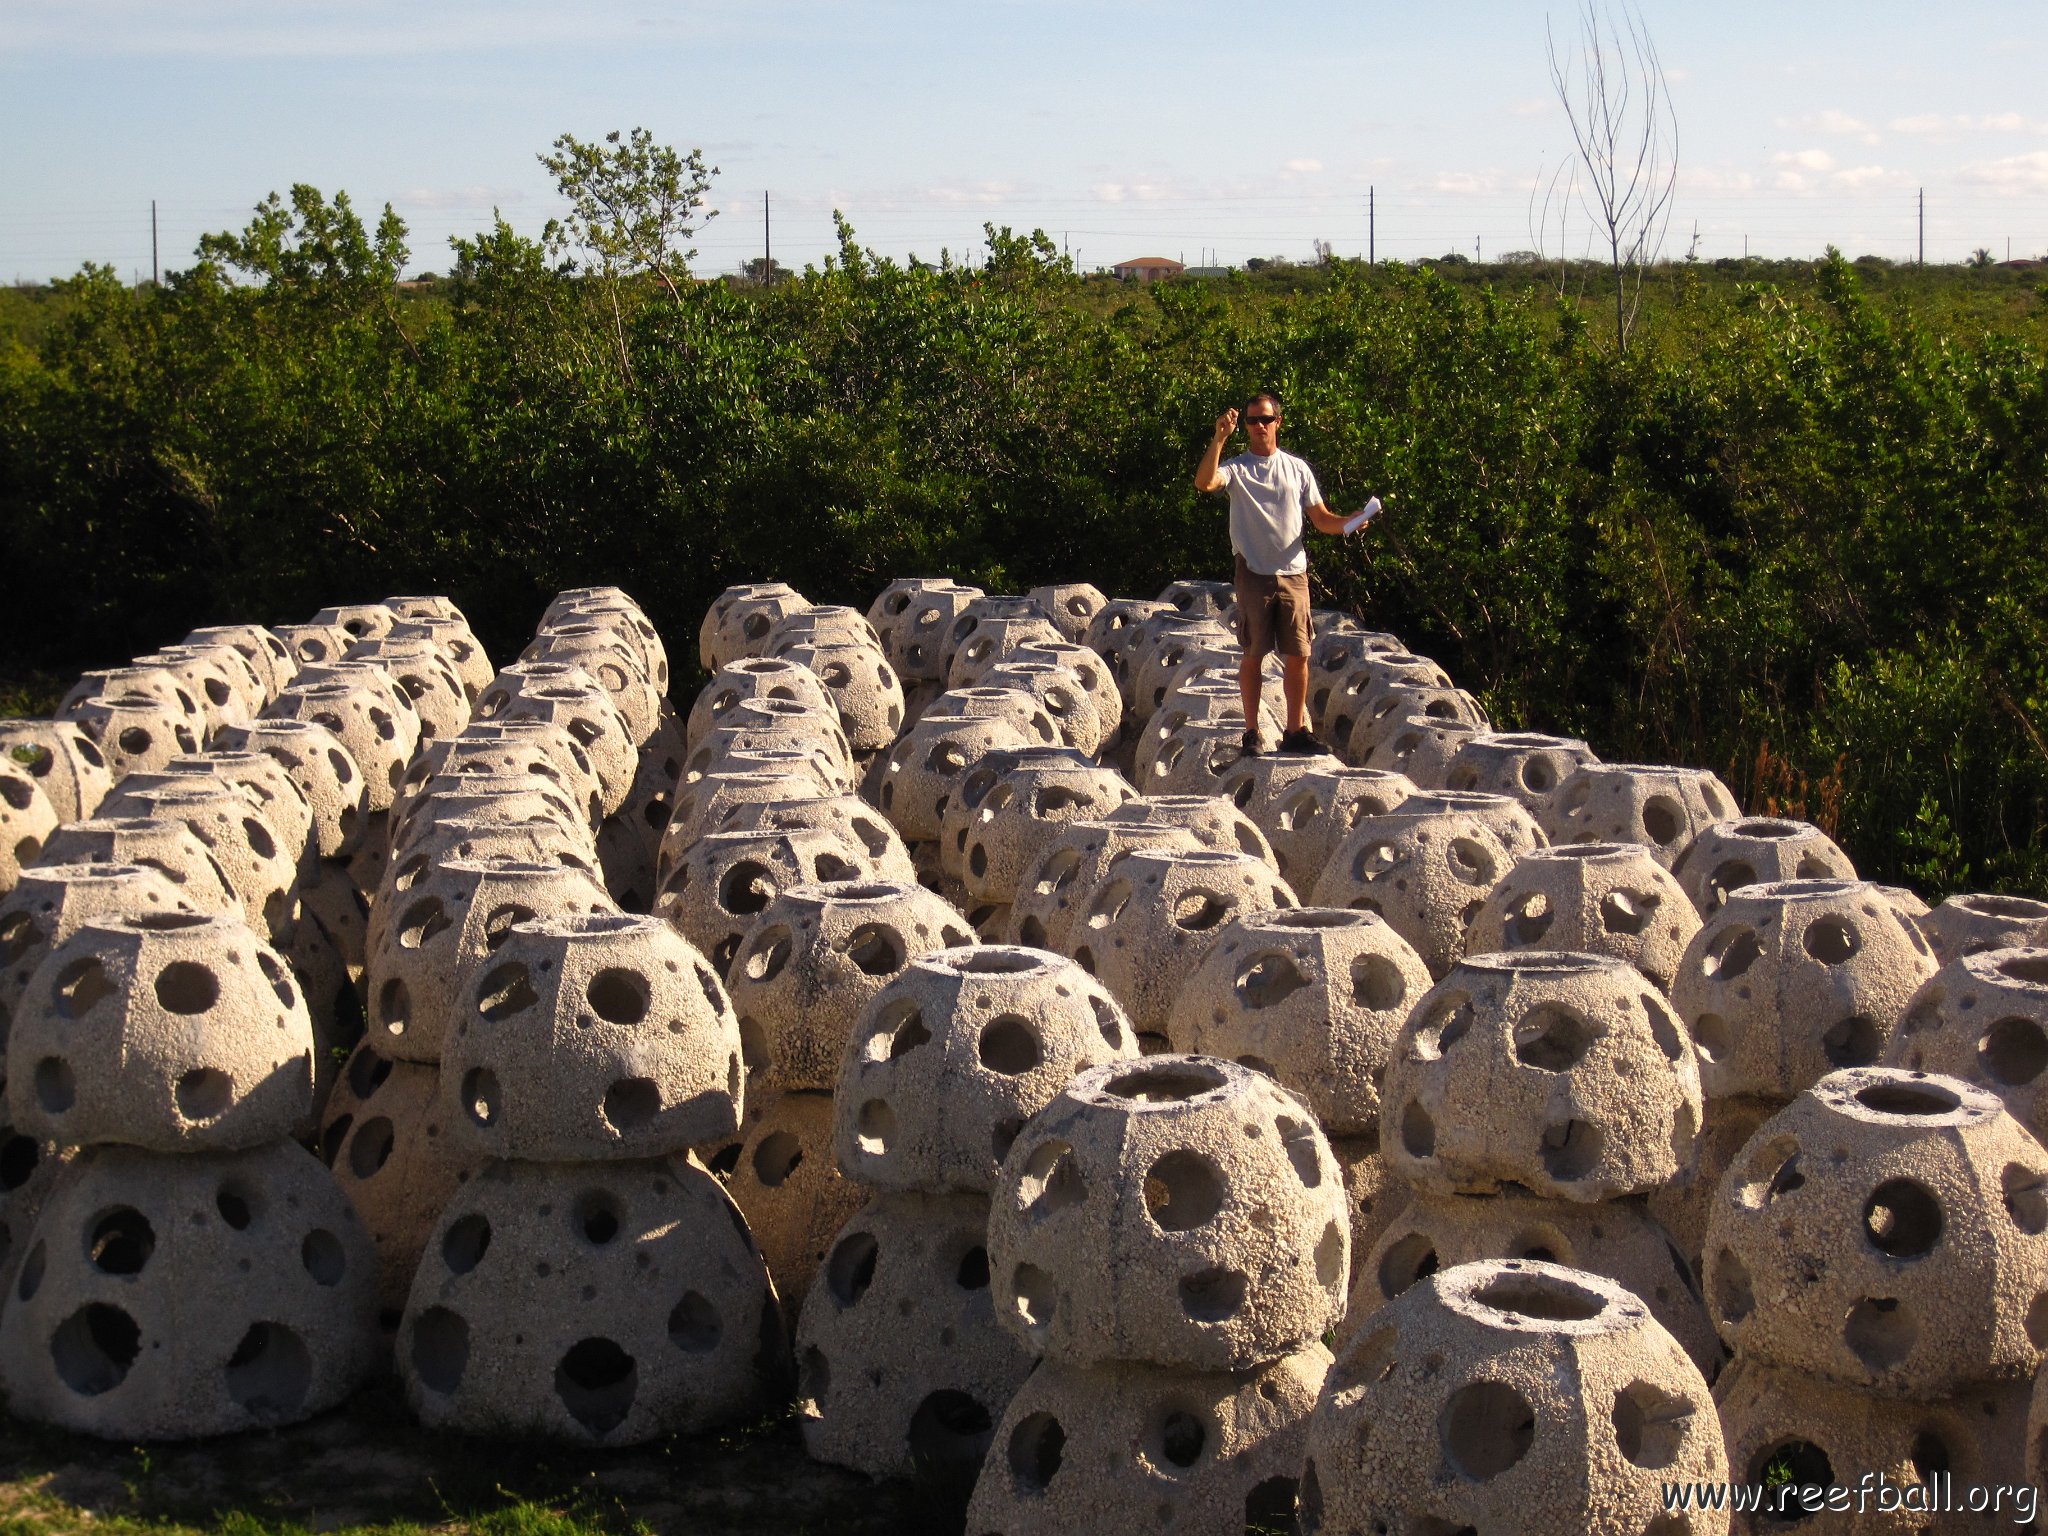 9.-Sea-Of-Reef-Balls-ready-to-be-deployed-at-Paradise-Cove